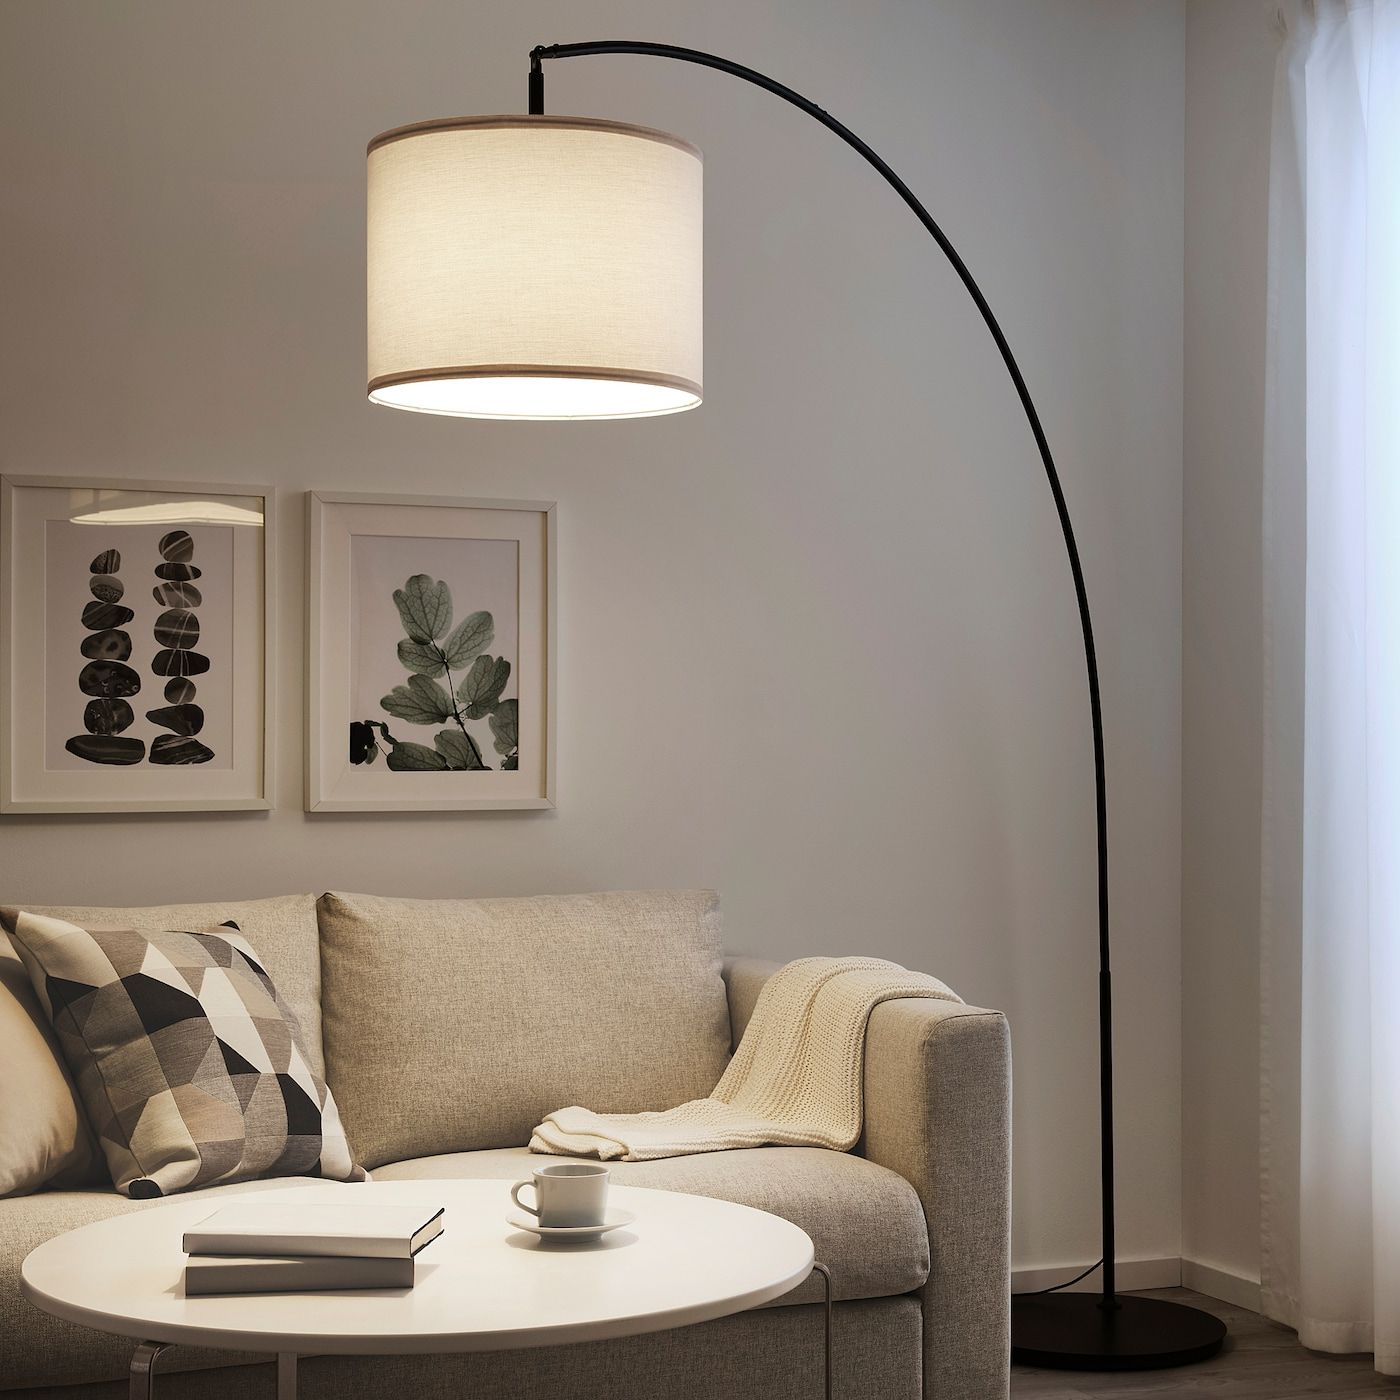 2019 Skaftet Floor Lamp Base, Arched, Black – Ikea Ca Within Arc Floor Lamps (View 5 of 15)